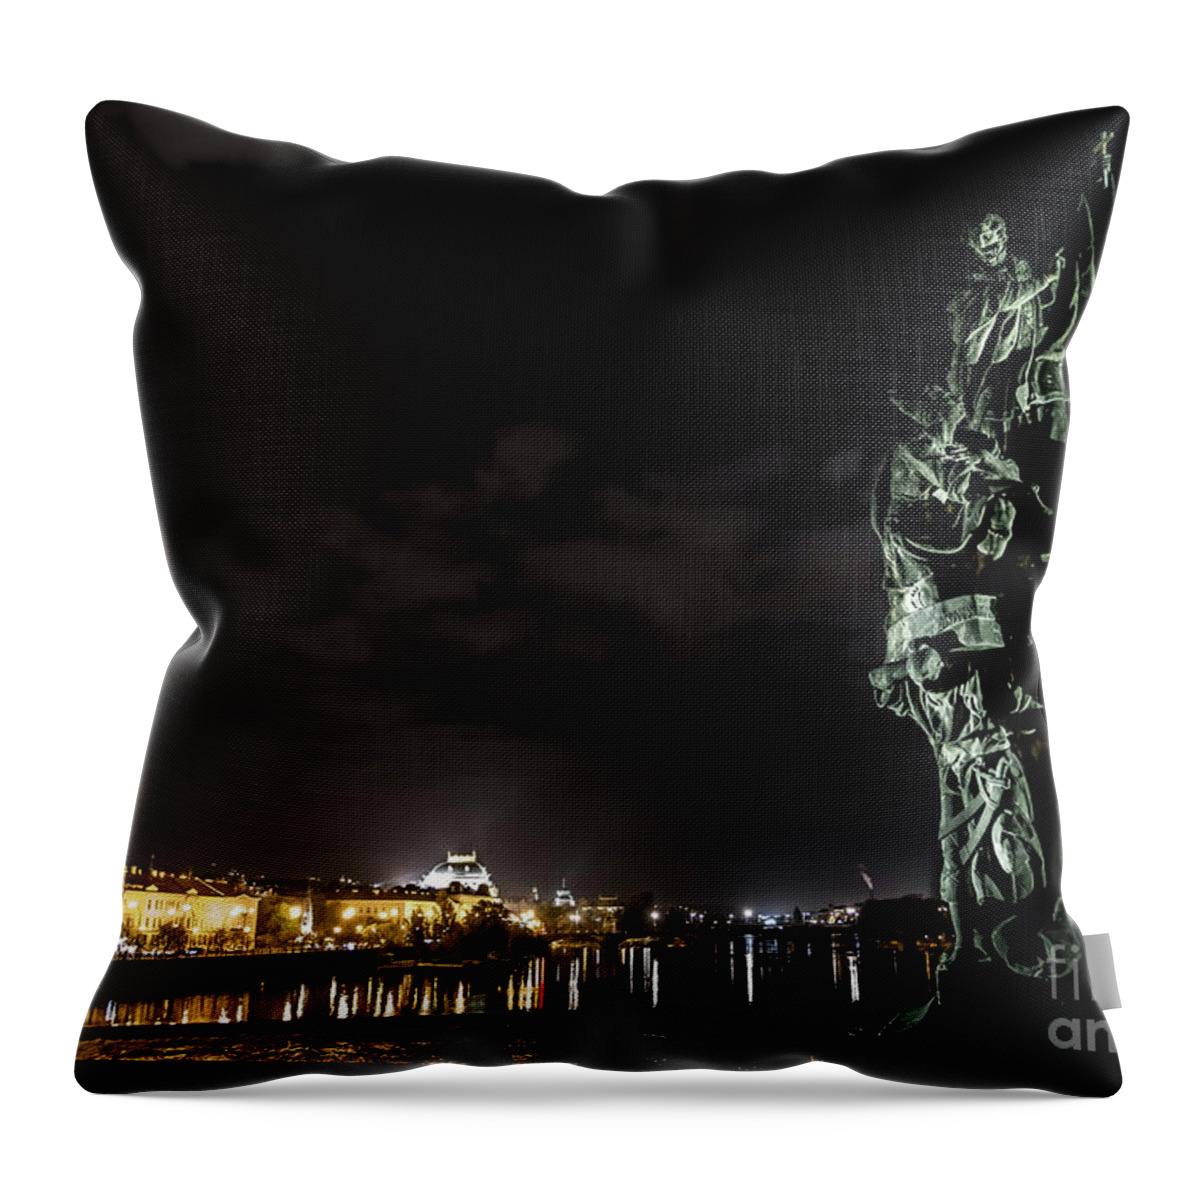 Ancient Throw Pillow featuring the photograph Statue On Charles Bridge And Illuminated Buildings In Prague In The Czech Republic by Andreas Berthold